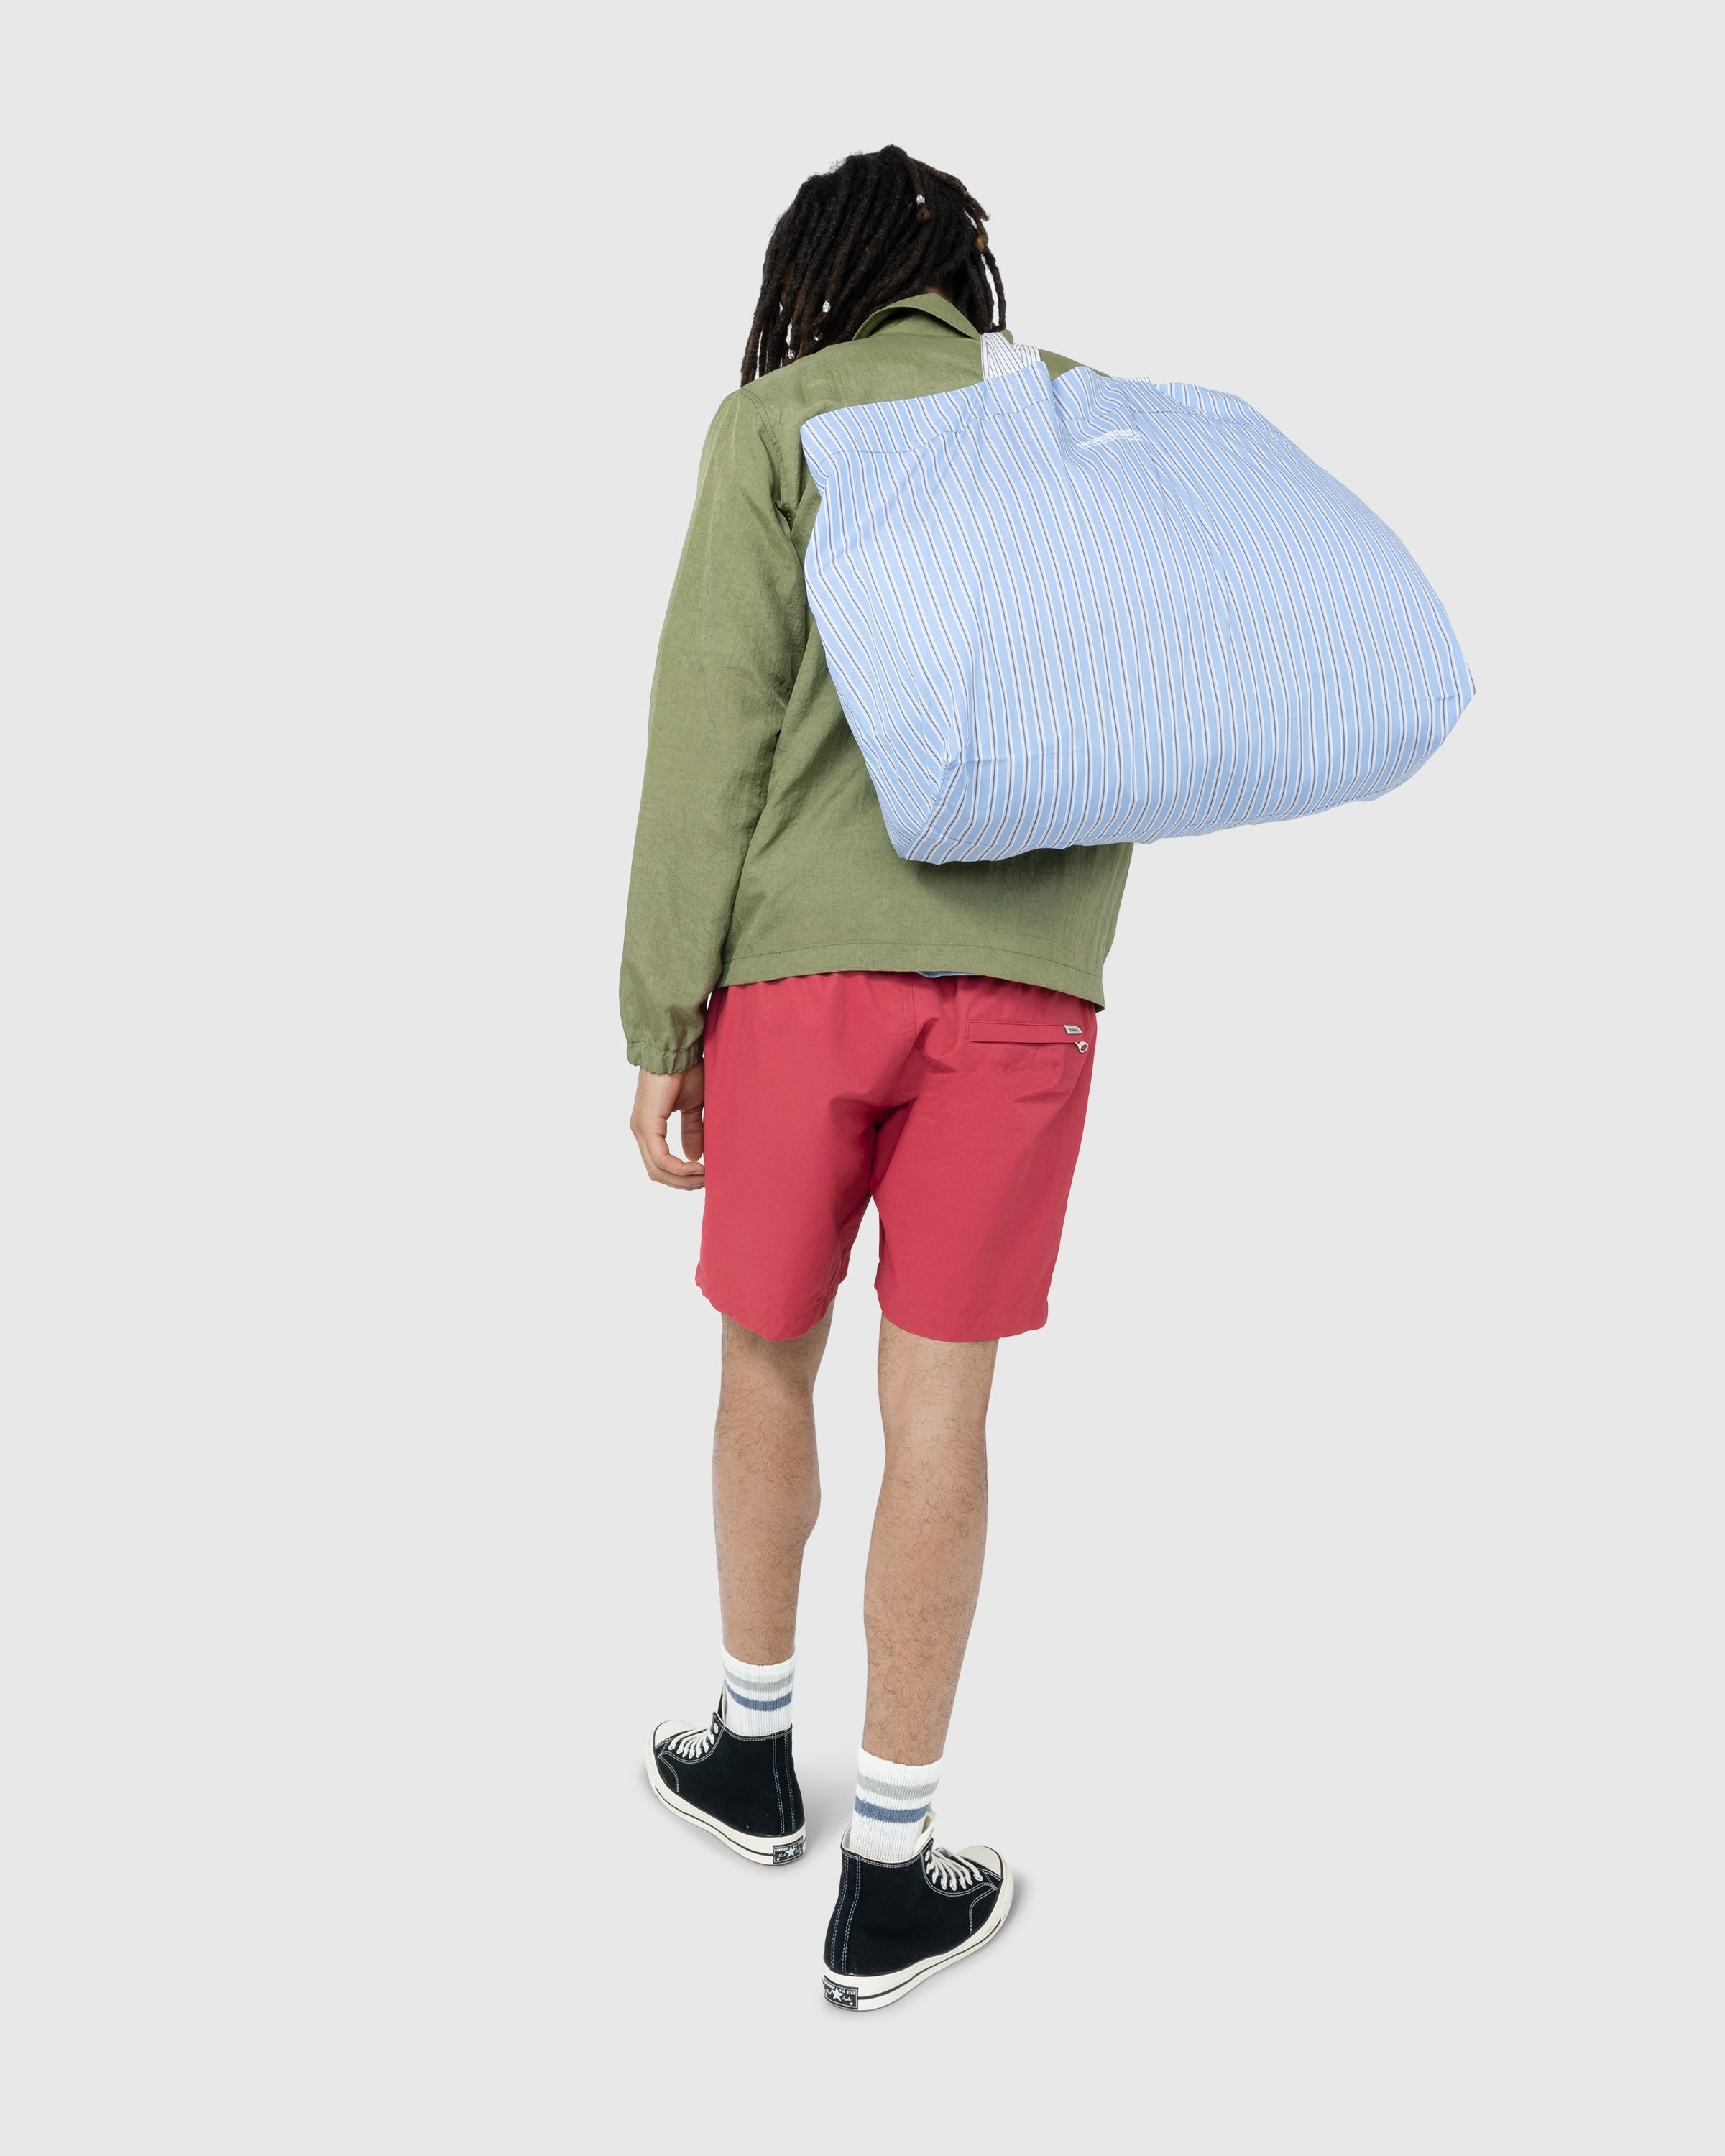 Highsnobiety - Shirting Laundry Bag Blue - Accessories - Blue - Image 6